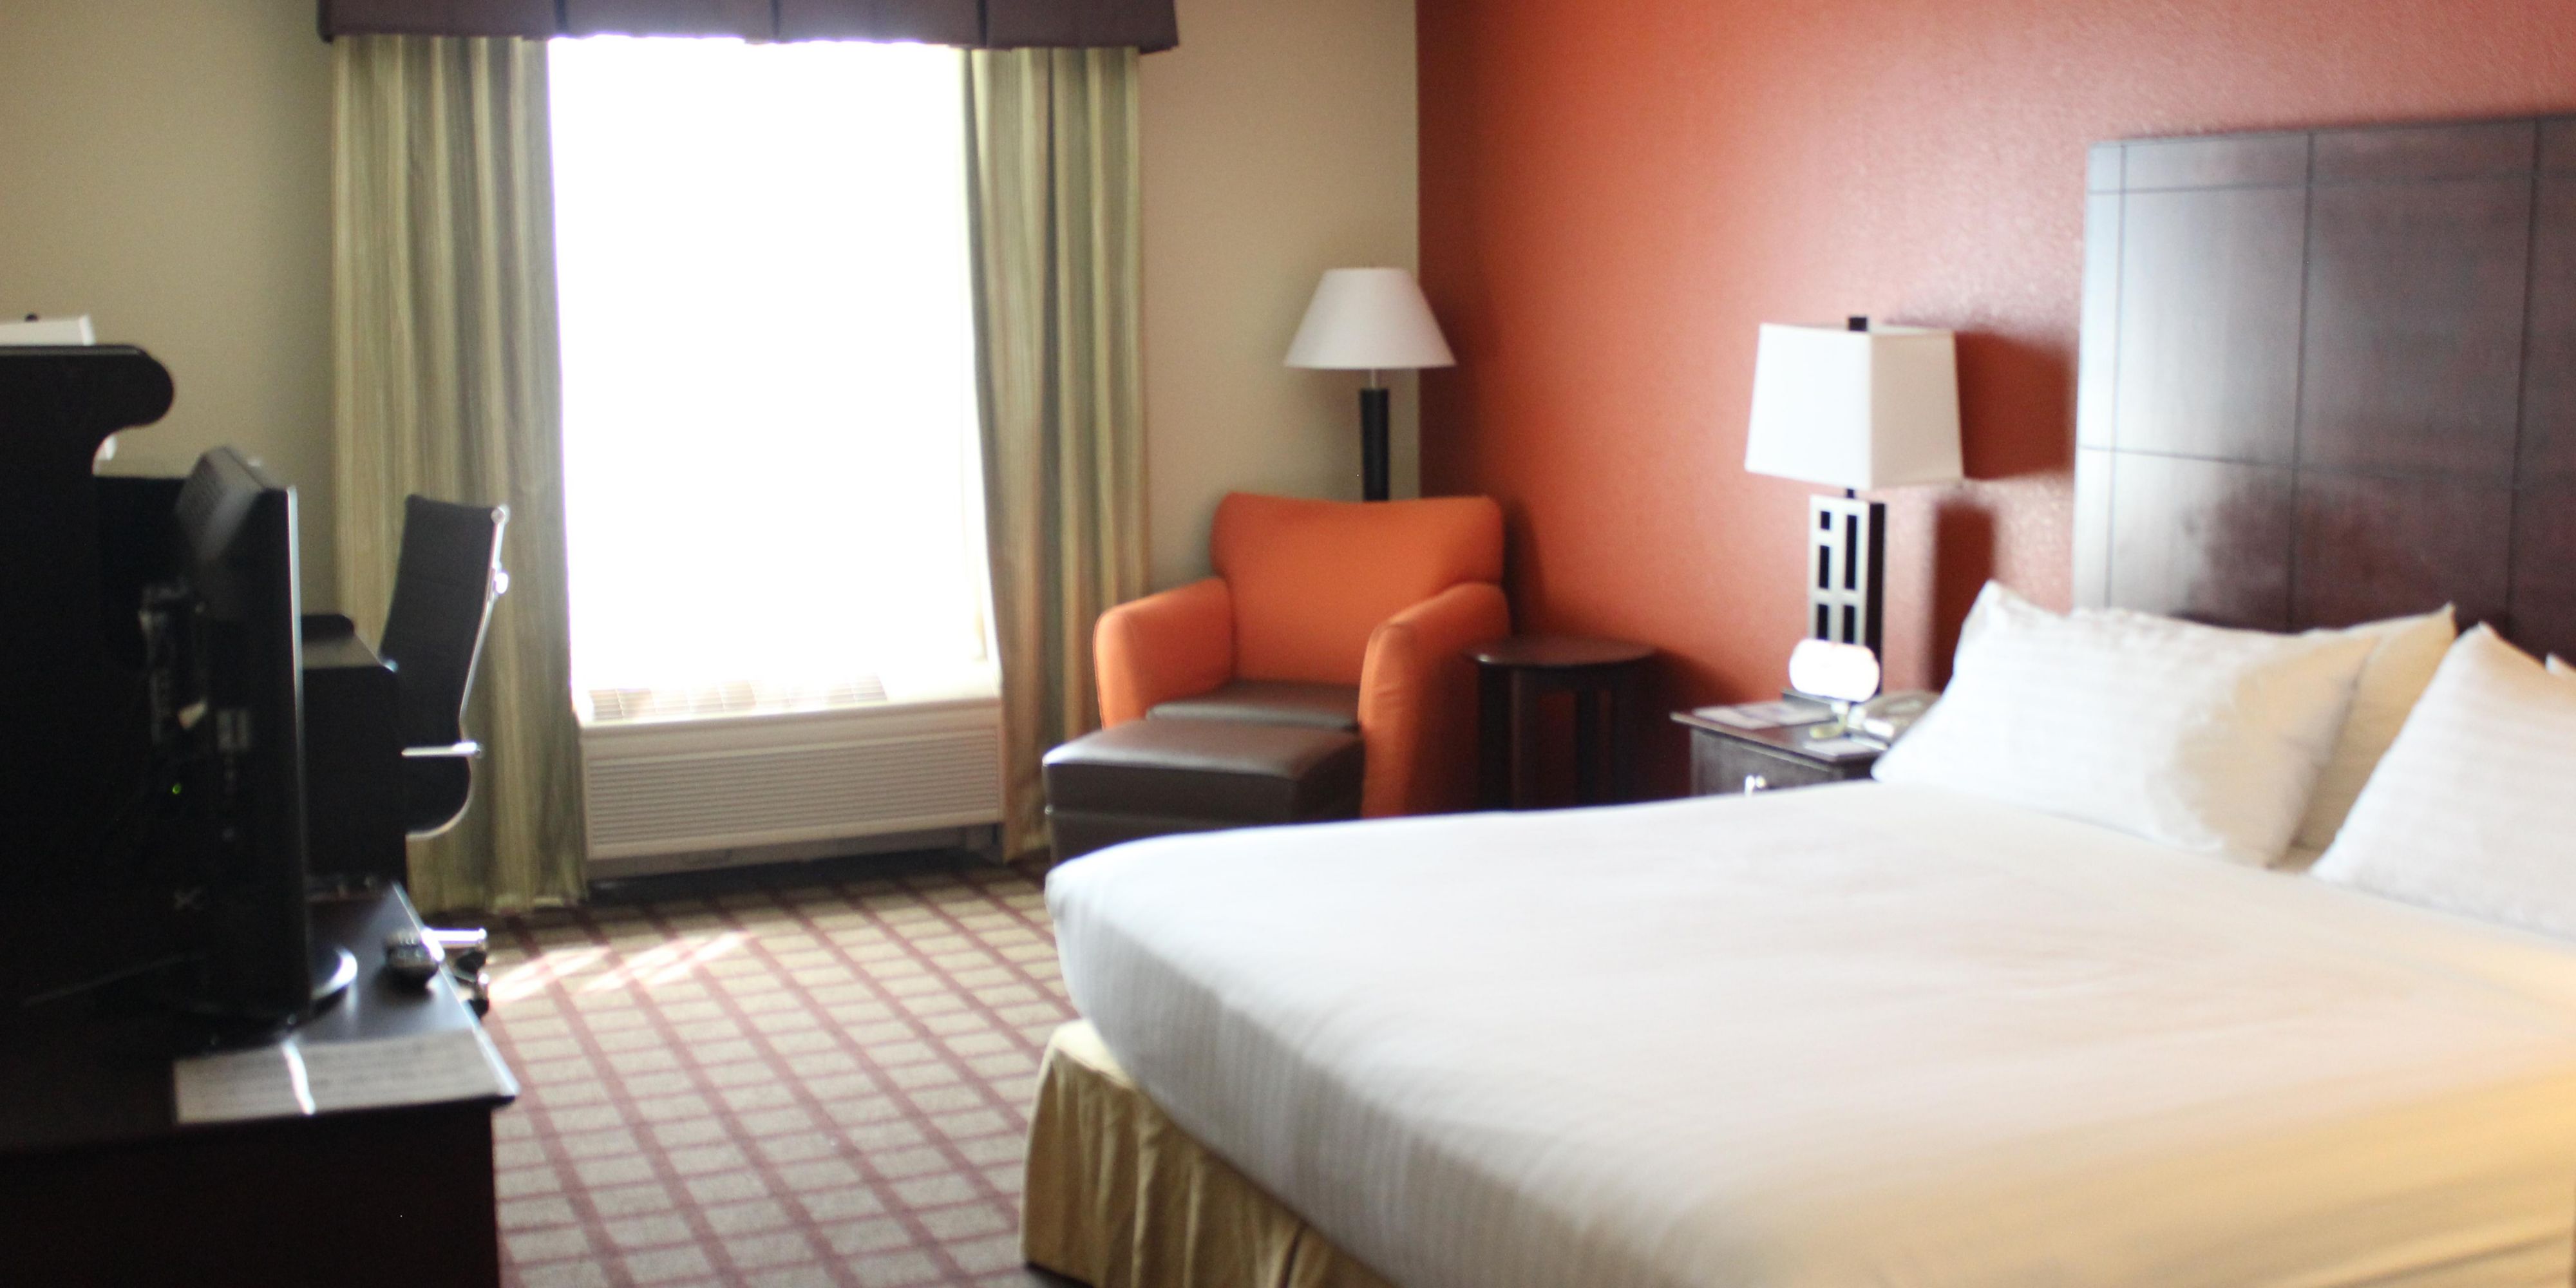 Contact our Sales Director directly for your extended stay needs and nightly rates.